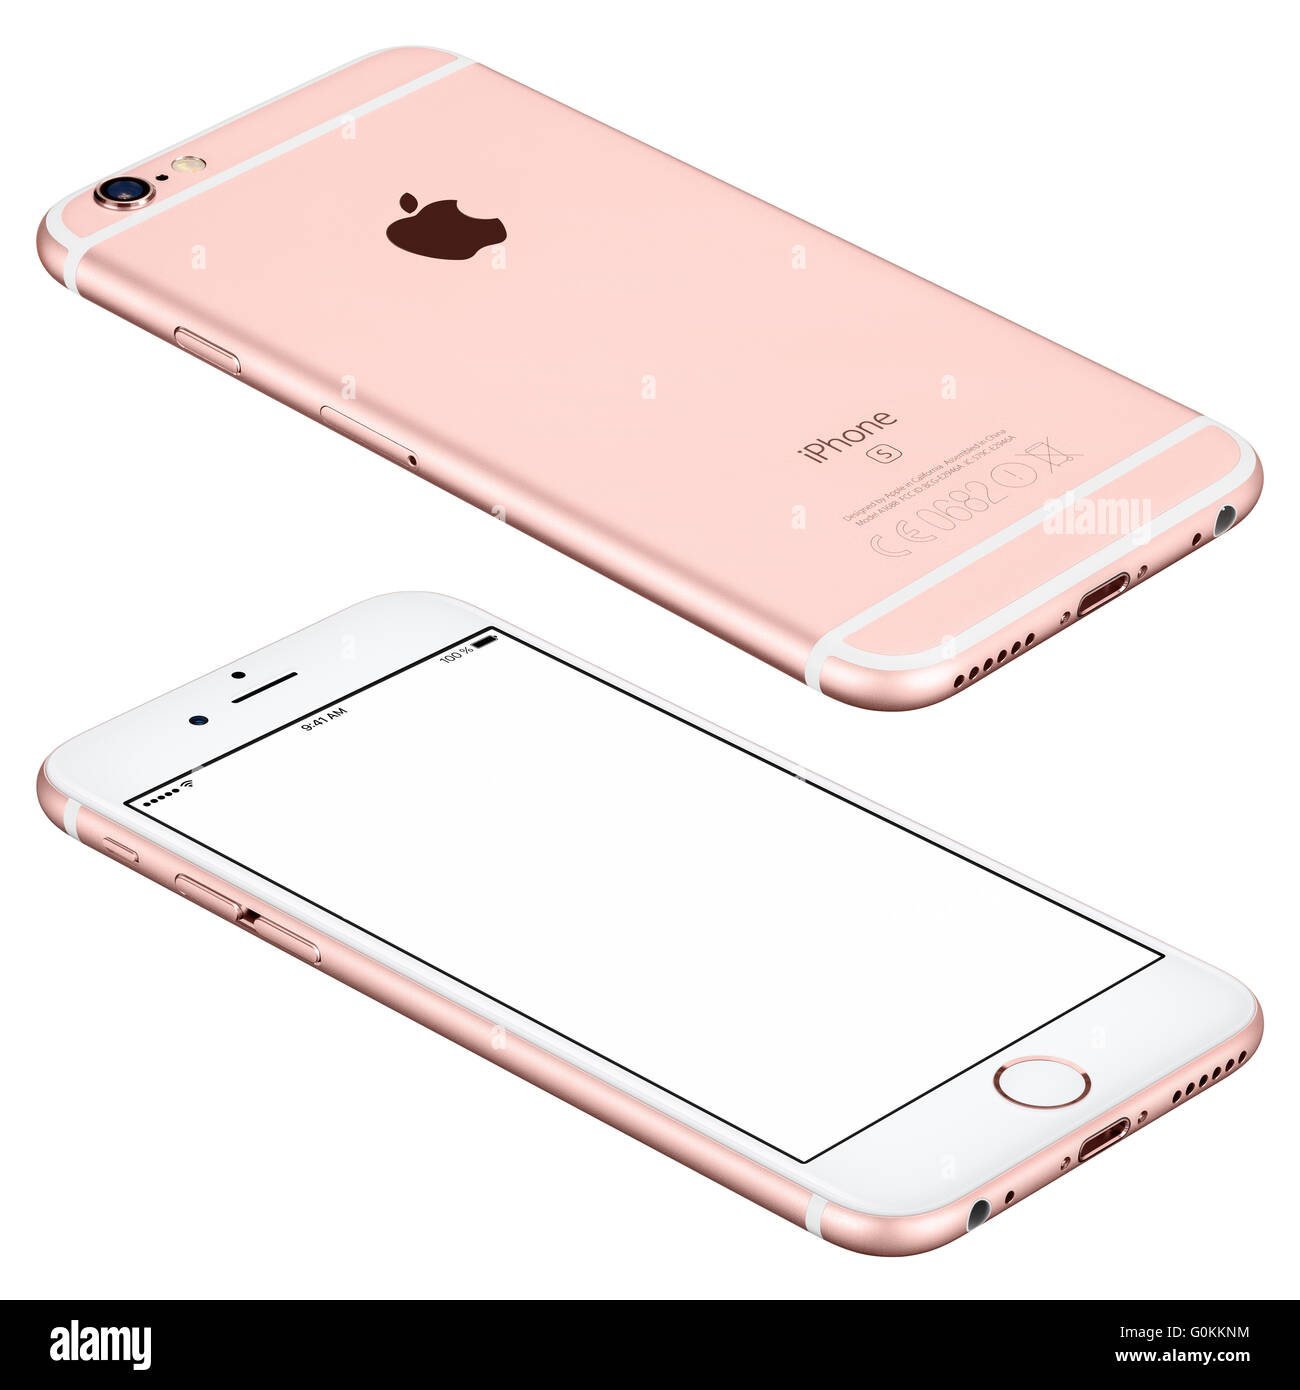 Varna, Bulgaria - October 25, 2015: Rose Gold Apple iPhone 6s mockup lies on the surface with white screen and back side Stock Photo